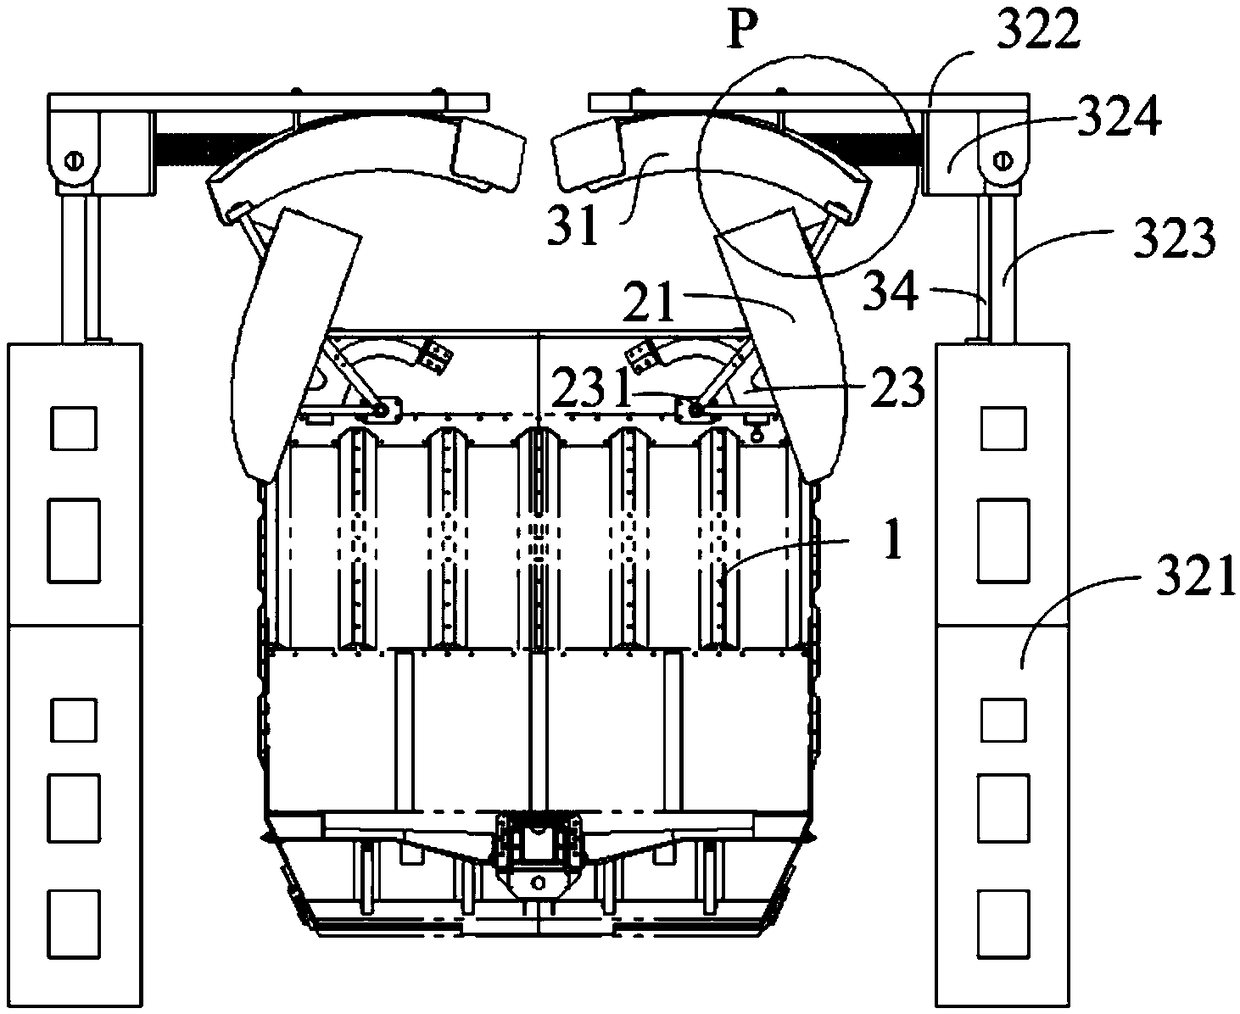 Top cover opening and closing device for freight car